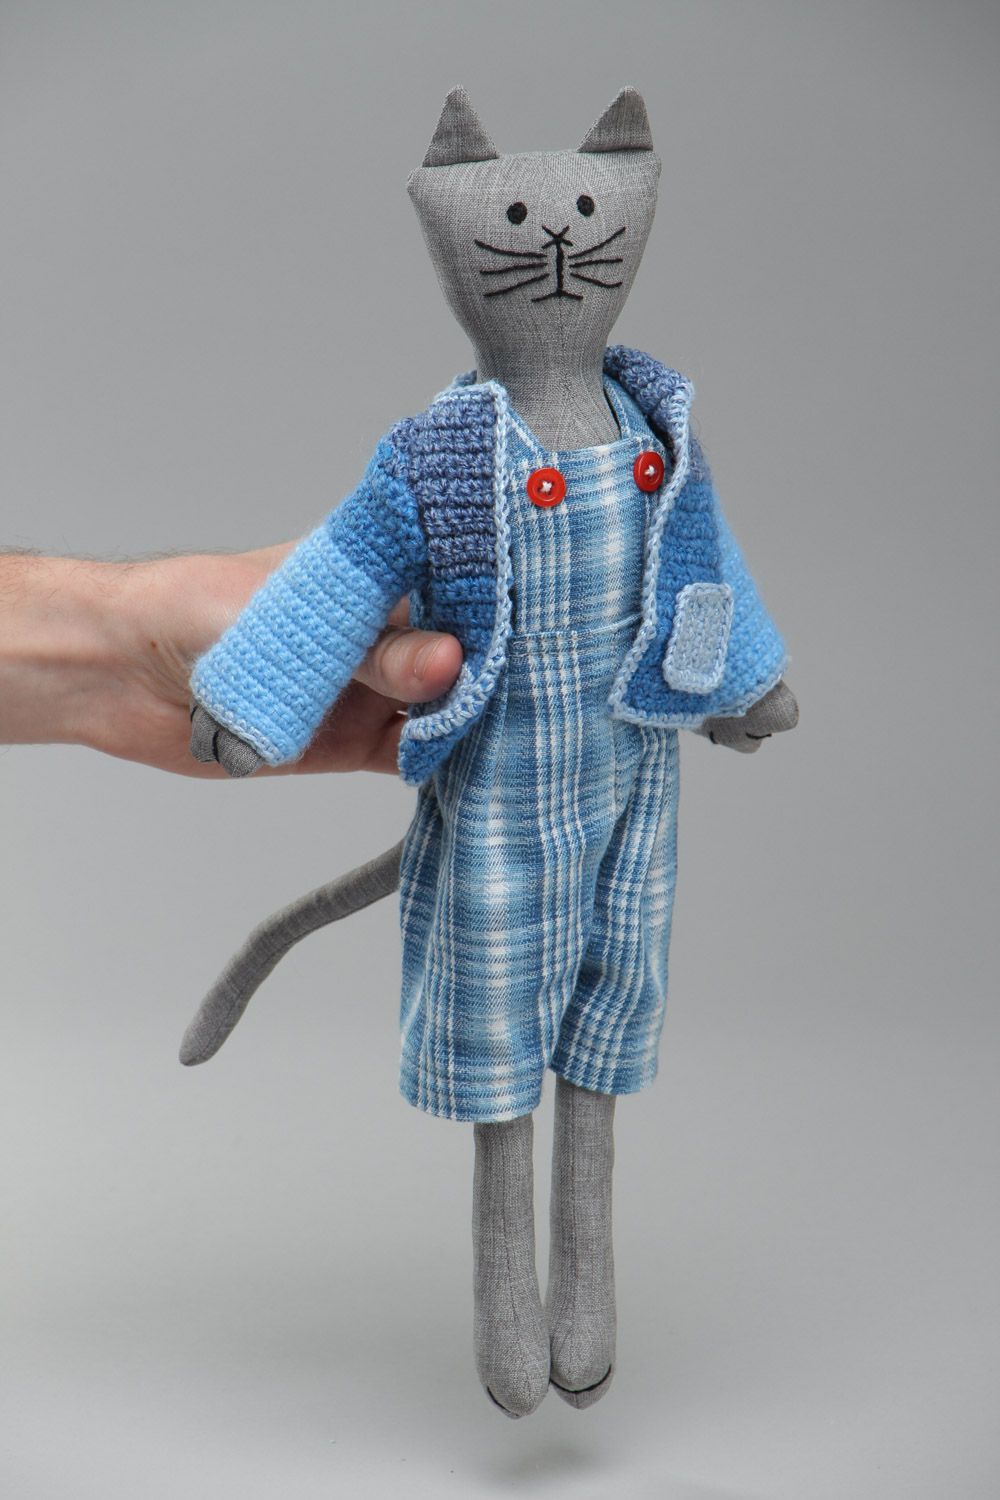 Handmade soft toy sewn of cotton cute gray cat in crocheted blue jacket photo 5